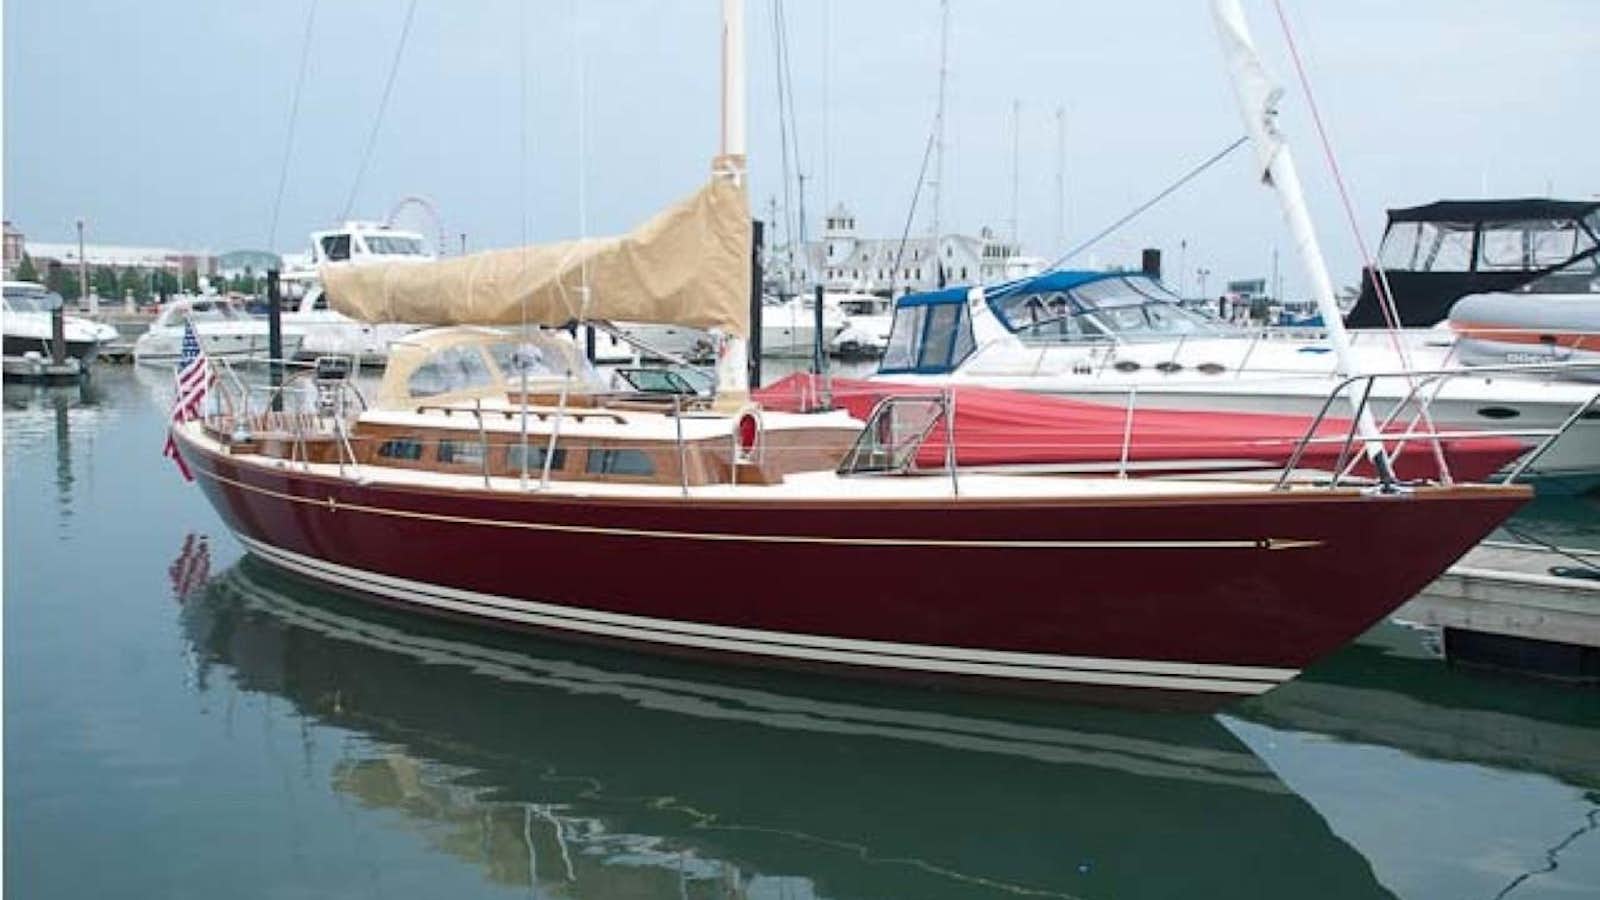 Watch Video for BOADICEA Yacht for Sale